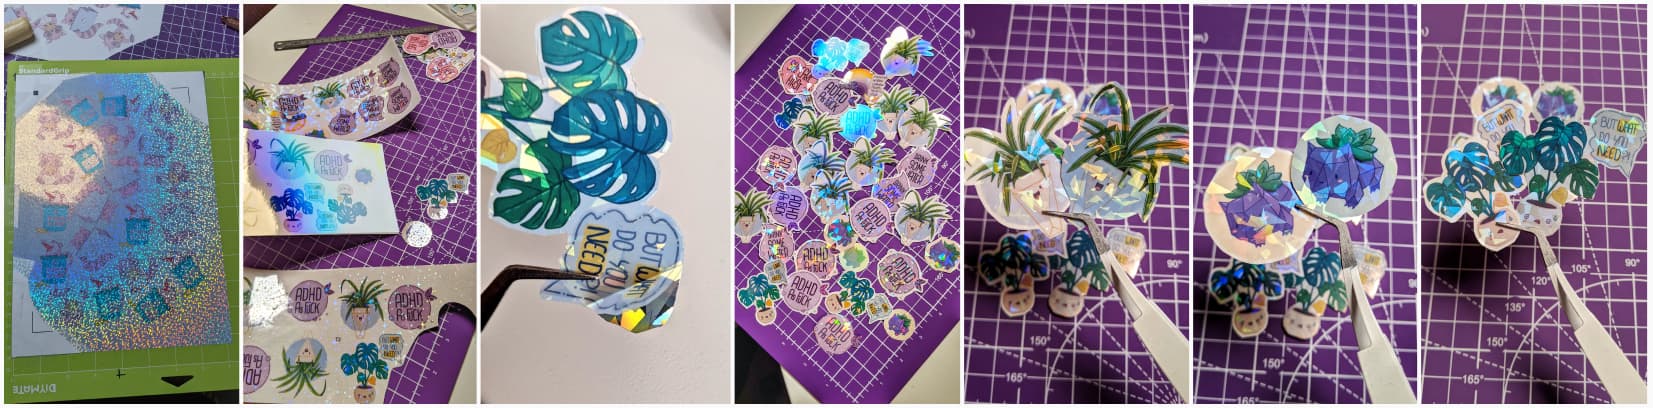 A collage of photo of different holographic and glitter stickers, including plants, some "adhd as fuck purple stickers" and more. One of the photo shows a damaged sticker with the holographic part separating from the rest.